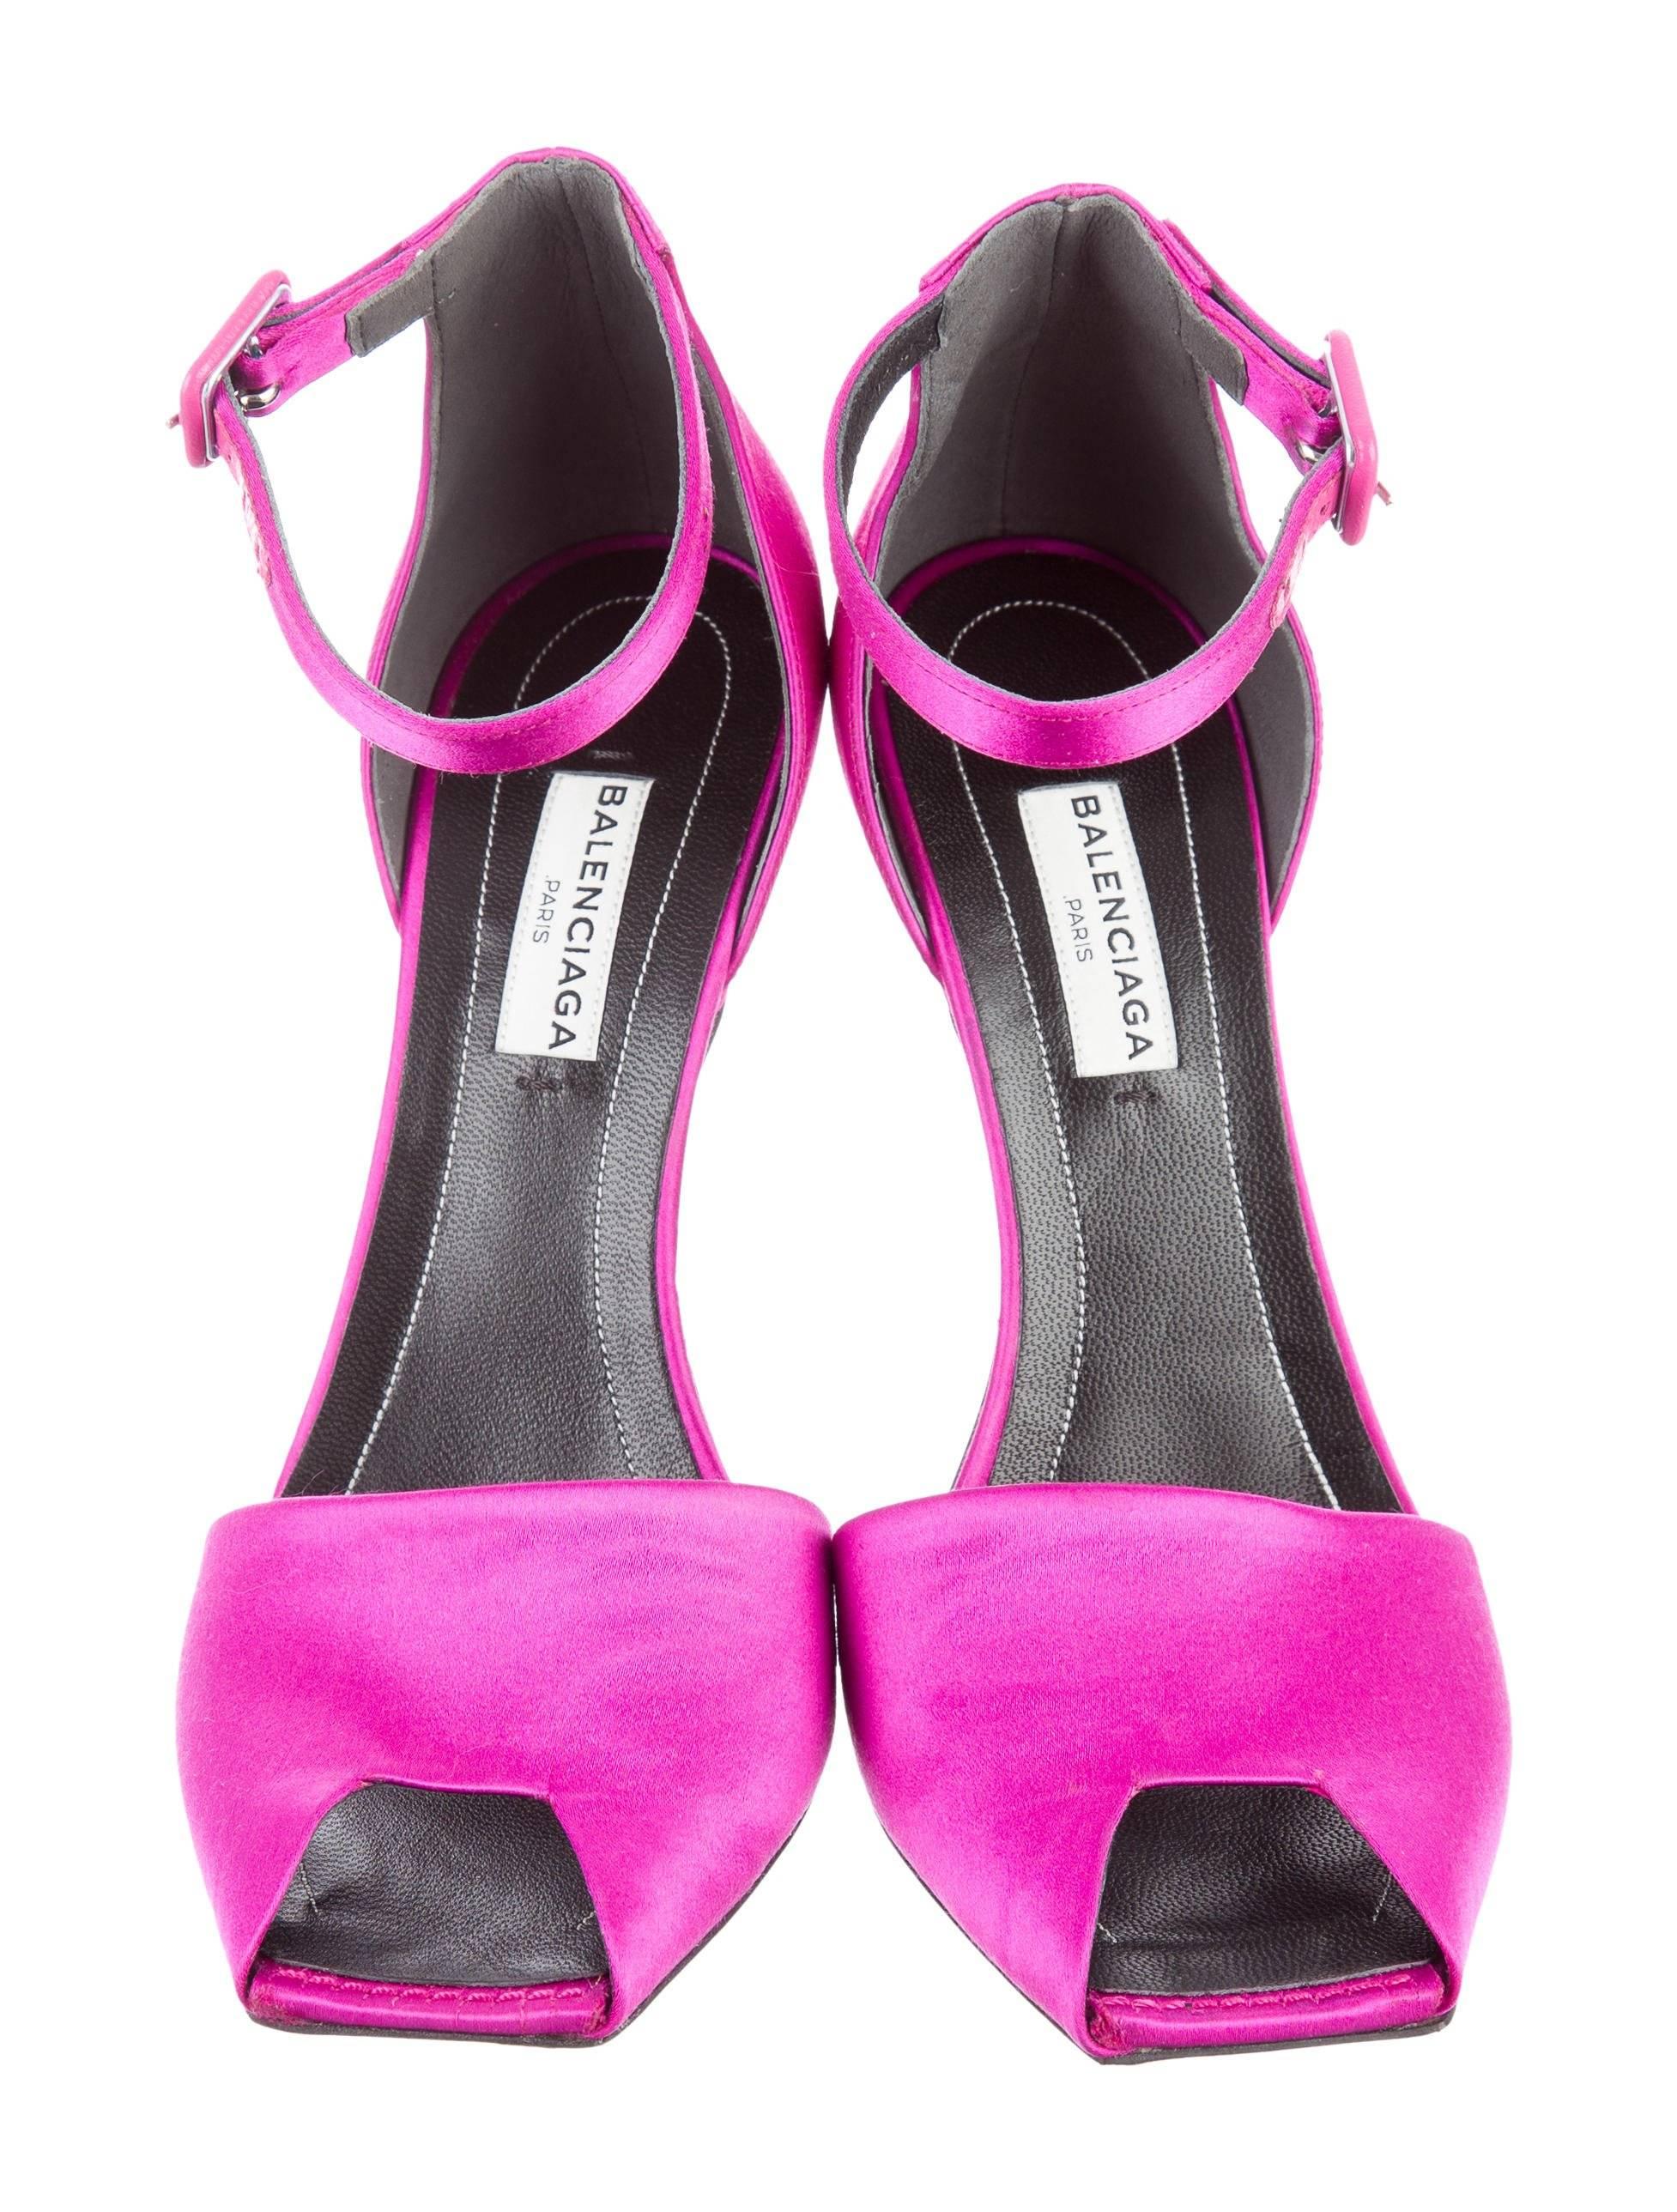 CURATOR'S NOTES

Balenciaga New Fuchsia Satin Evening Open Toe Pumps Sandals Heels  

Size IT 36
Satin
Ankle buckle closure 
Made in Italy
Heels height 4.25